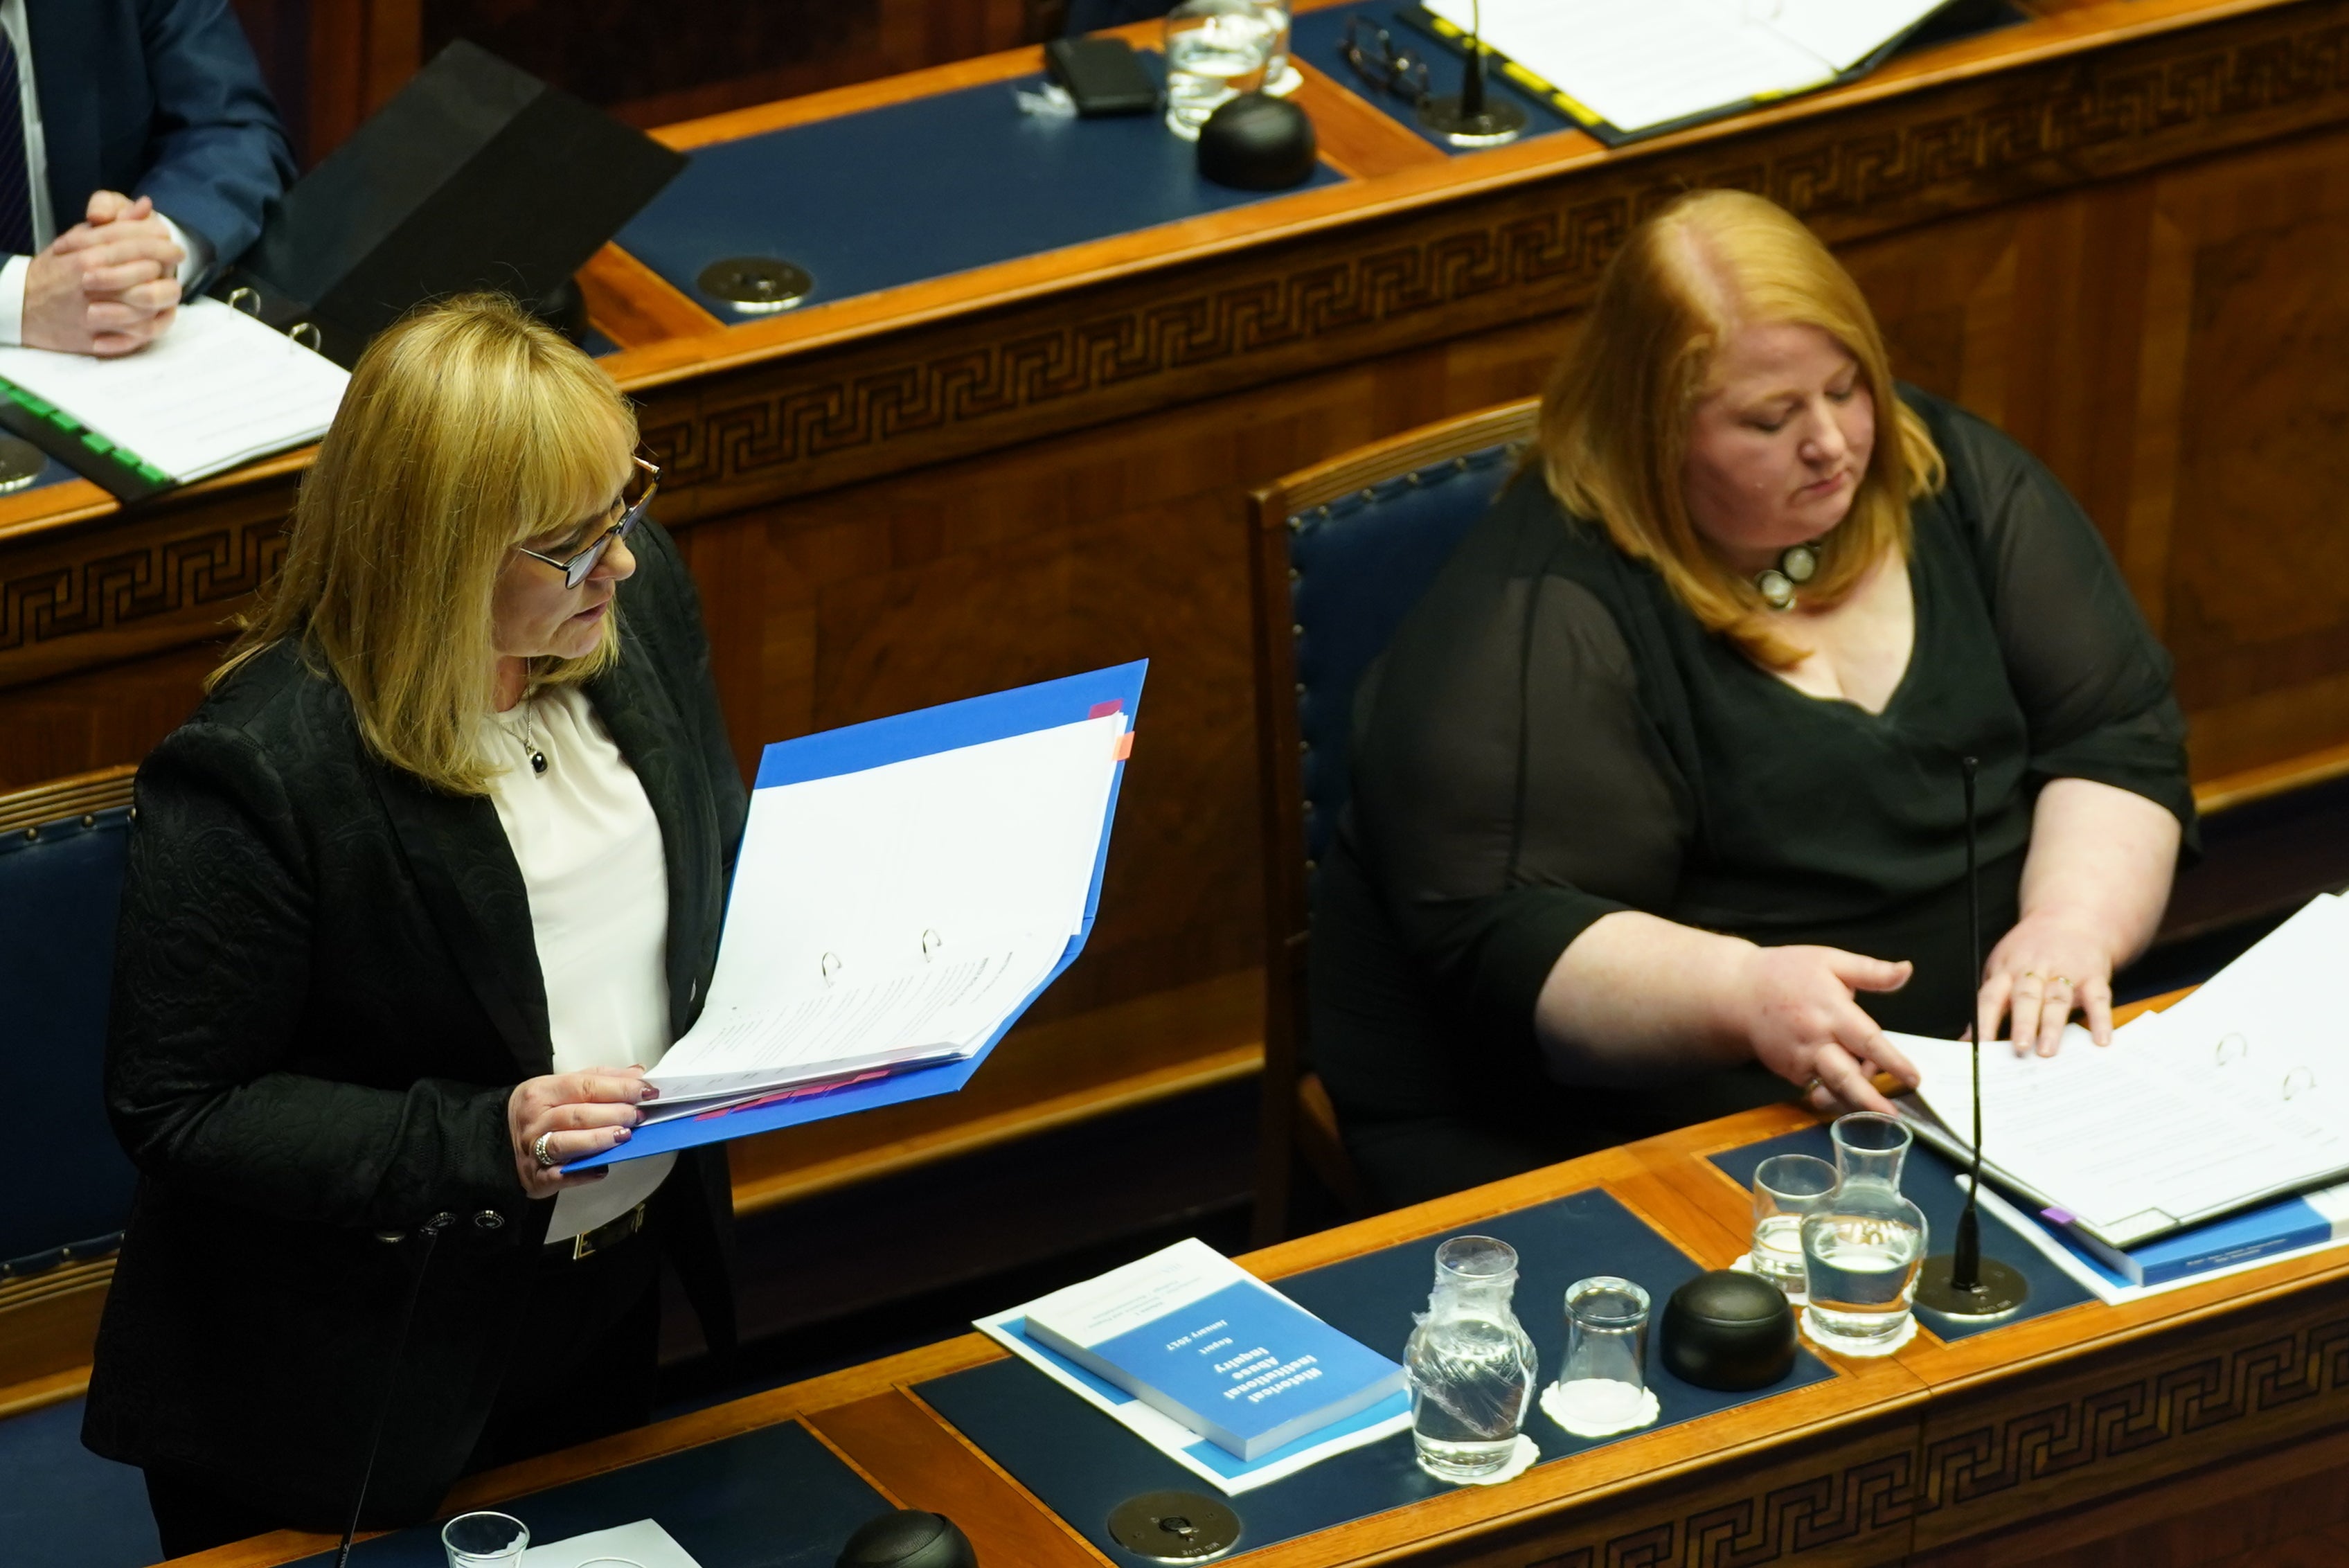 DUP education minister Michelle McIlveen speaks in the Northern Ireland Assembly chamber at Stormont during the delivery of the long-awaited public apology to the victims of historical institutional abuse (Brian Lawless/PA)